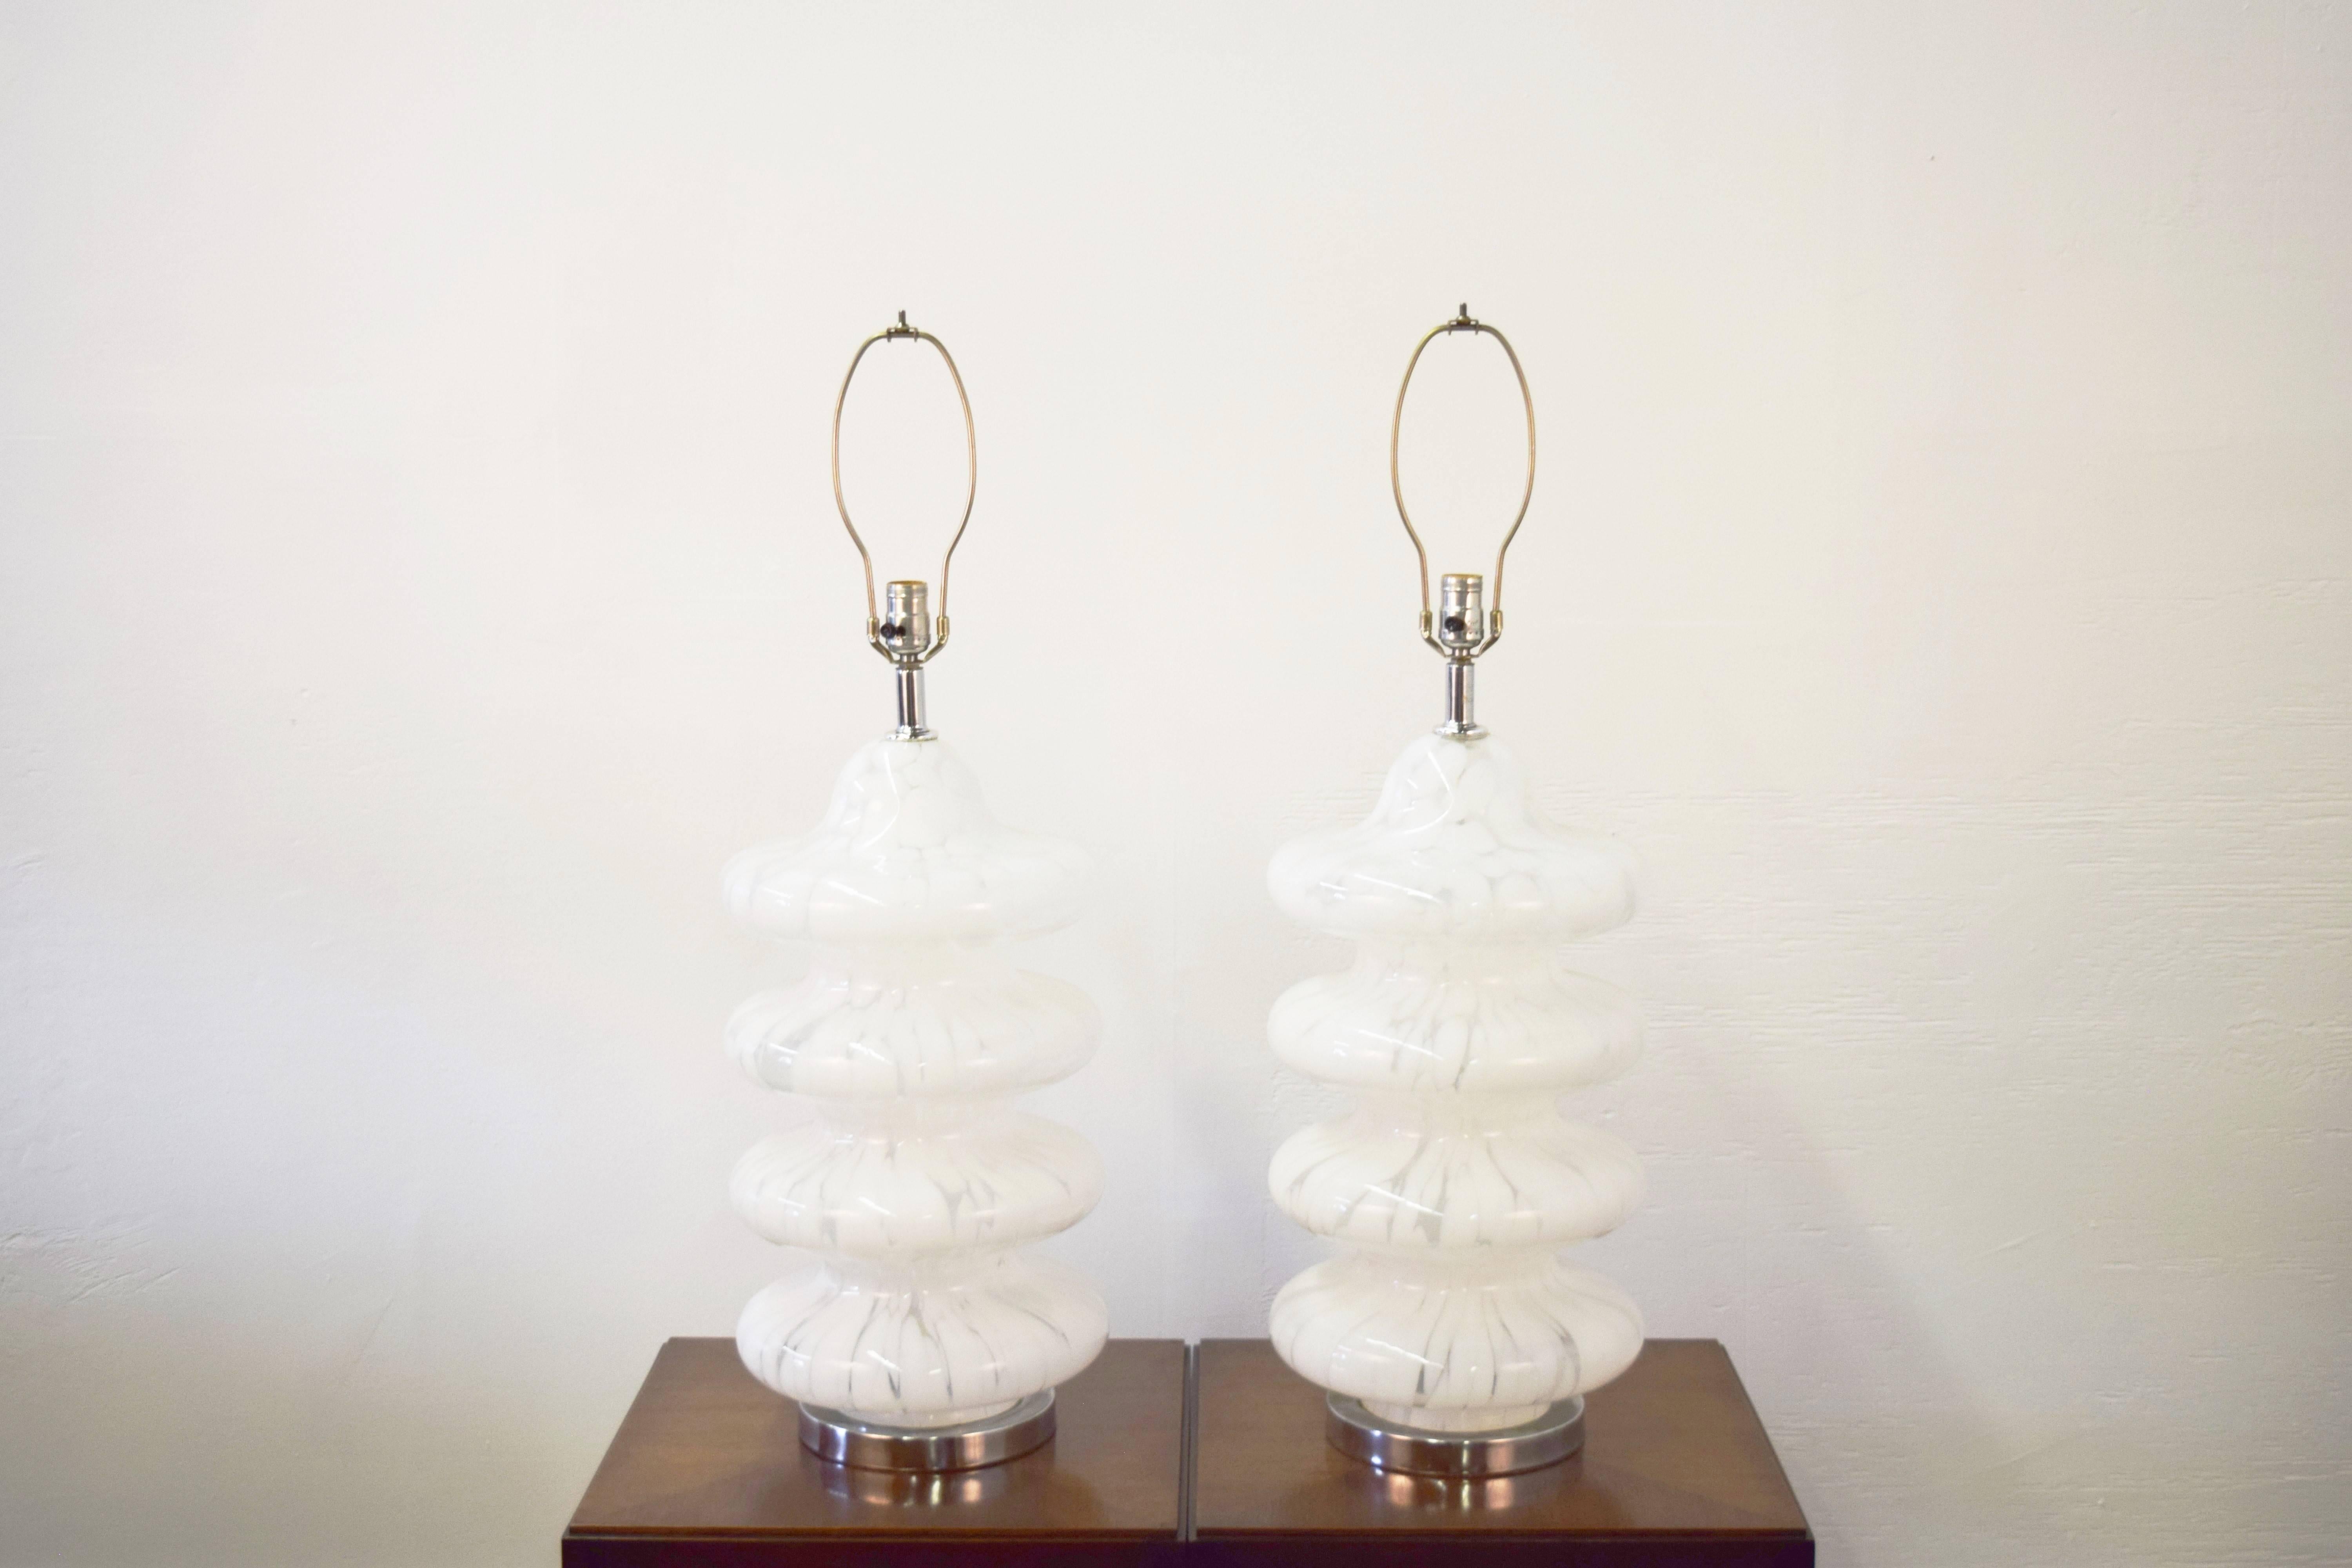 Pair of four-tiered Murano table lamp. Lamps sit on chrome bases.